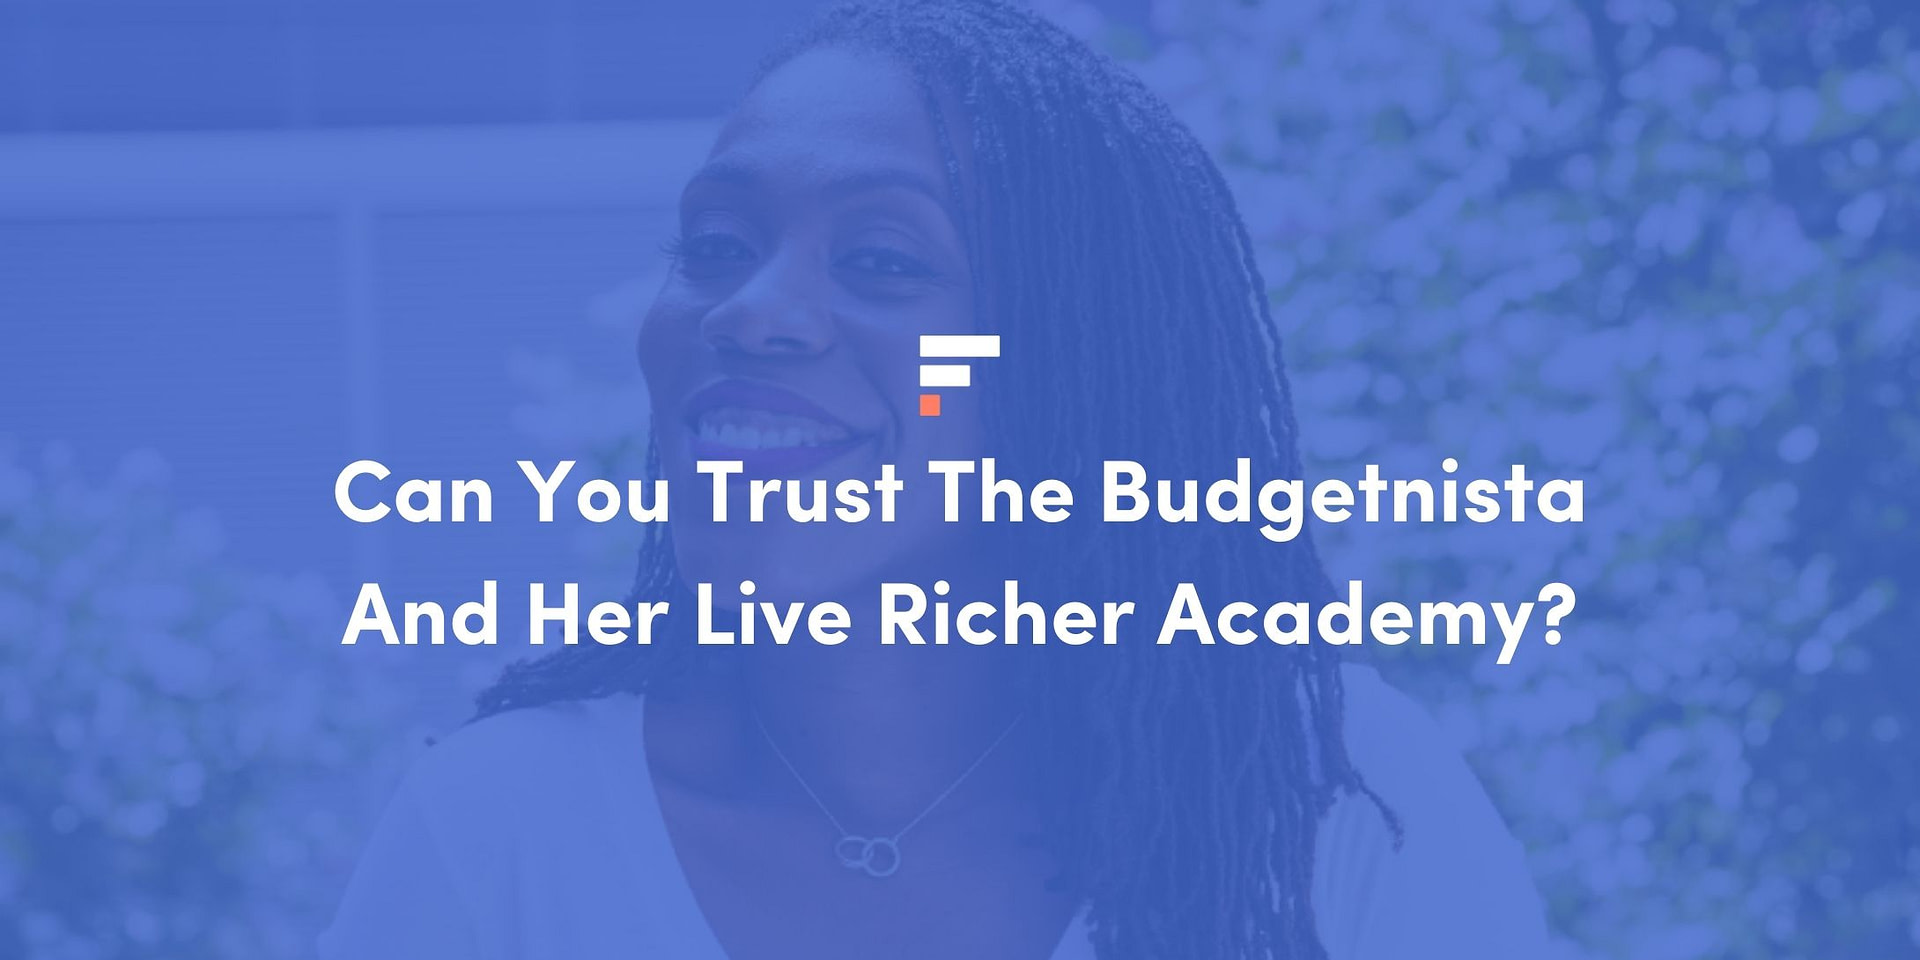 Can You Trust The Budgetnista And Her Live Richer Academy?